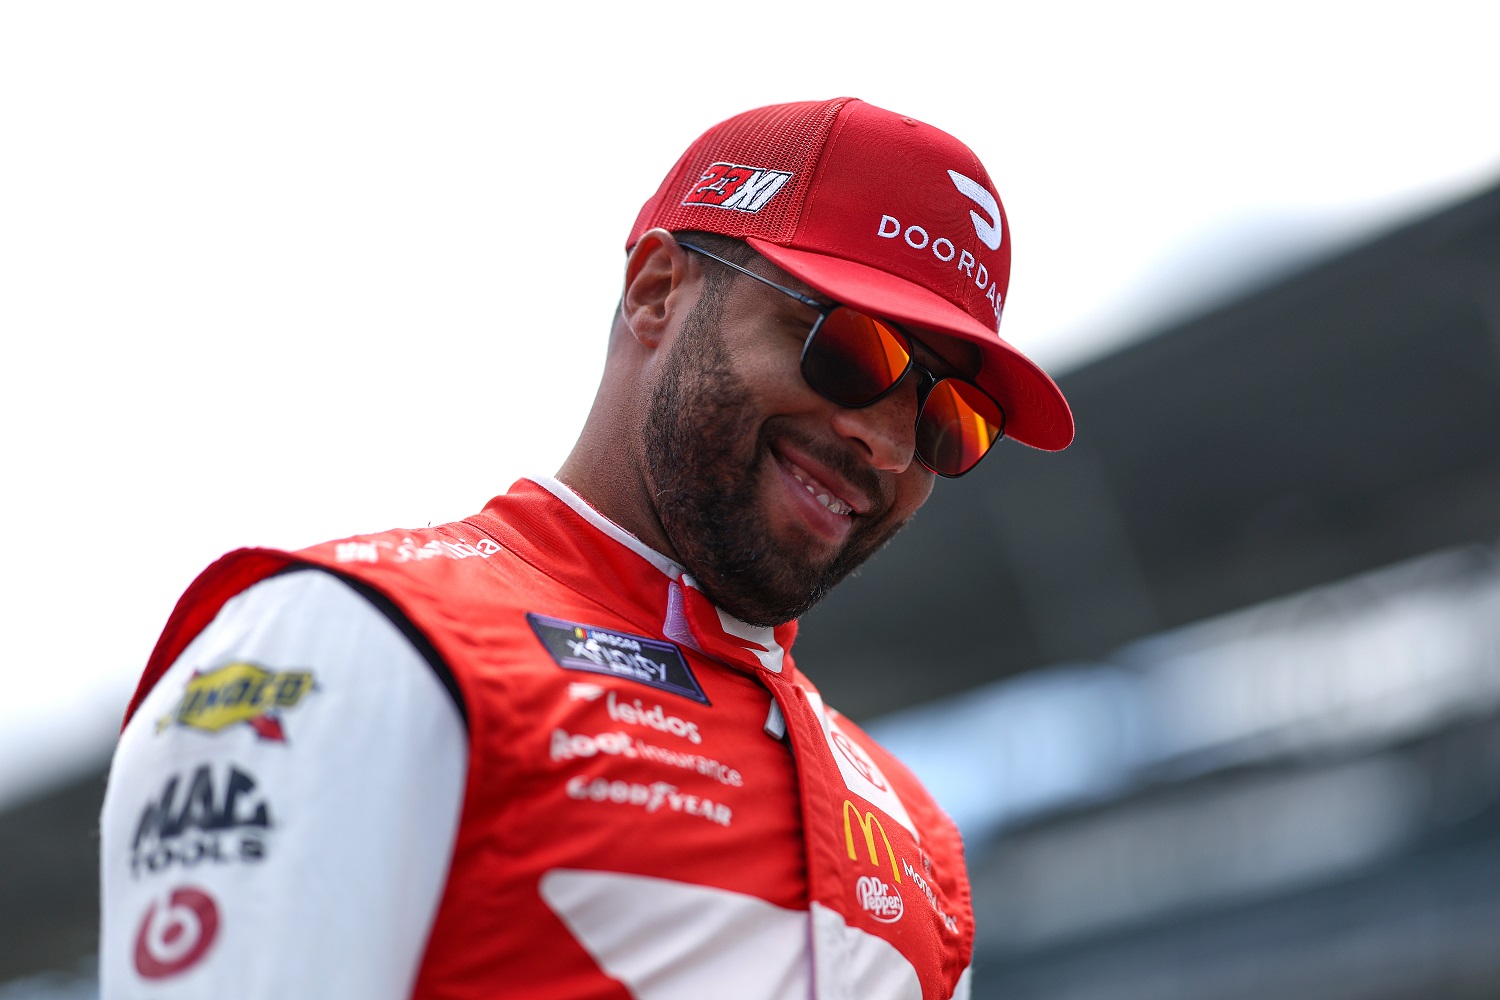 Bubba Wallace smiles on the grid during practice for the NASCAR Xfinity Series Pennzoil 150 at the Brickyard at Indianapolis Motor Speedway on July 29, 2022. | James Gilbert/Getty Images